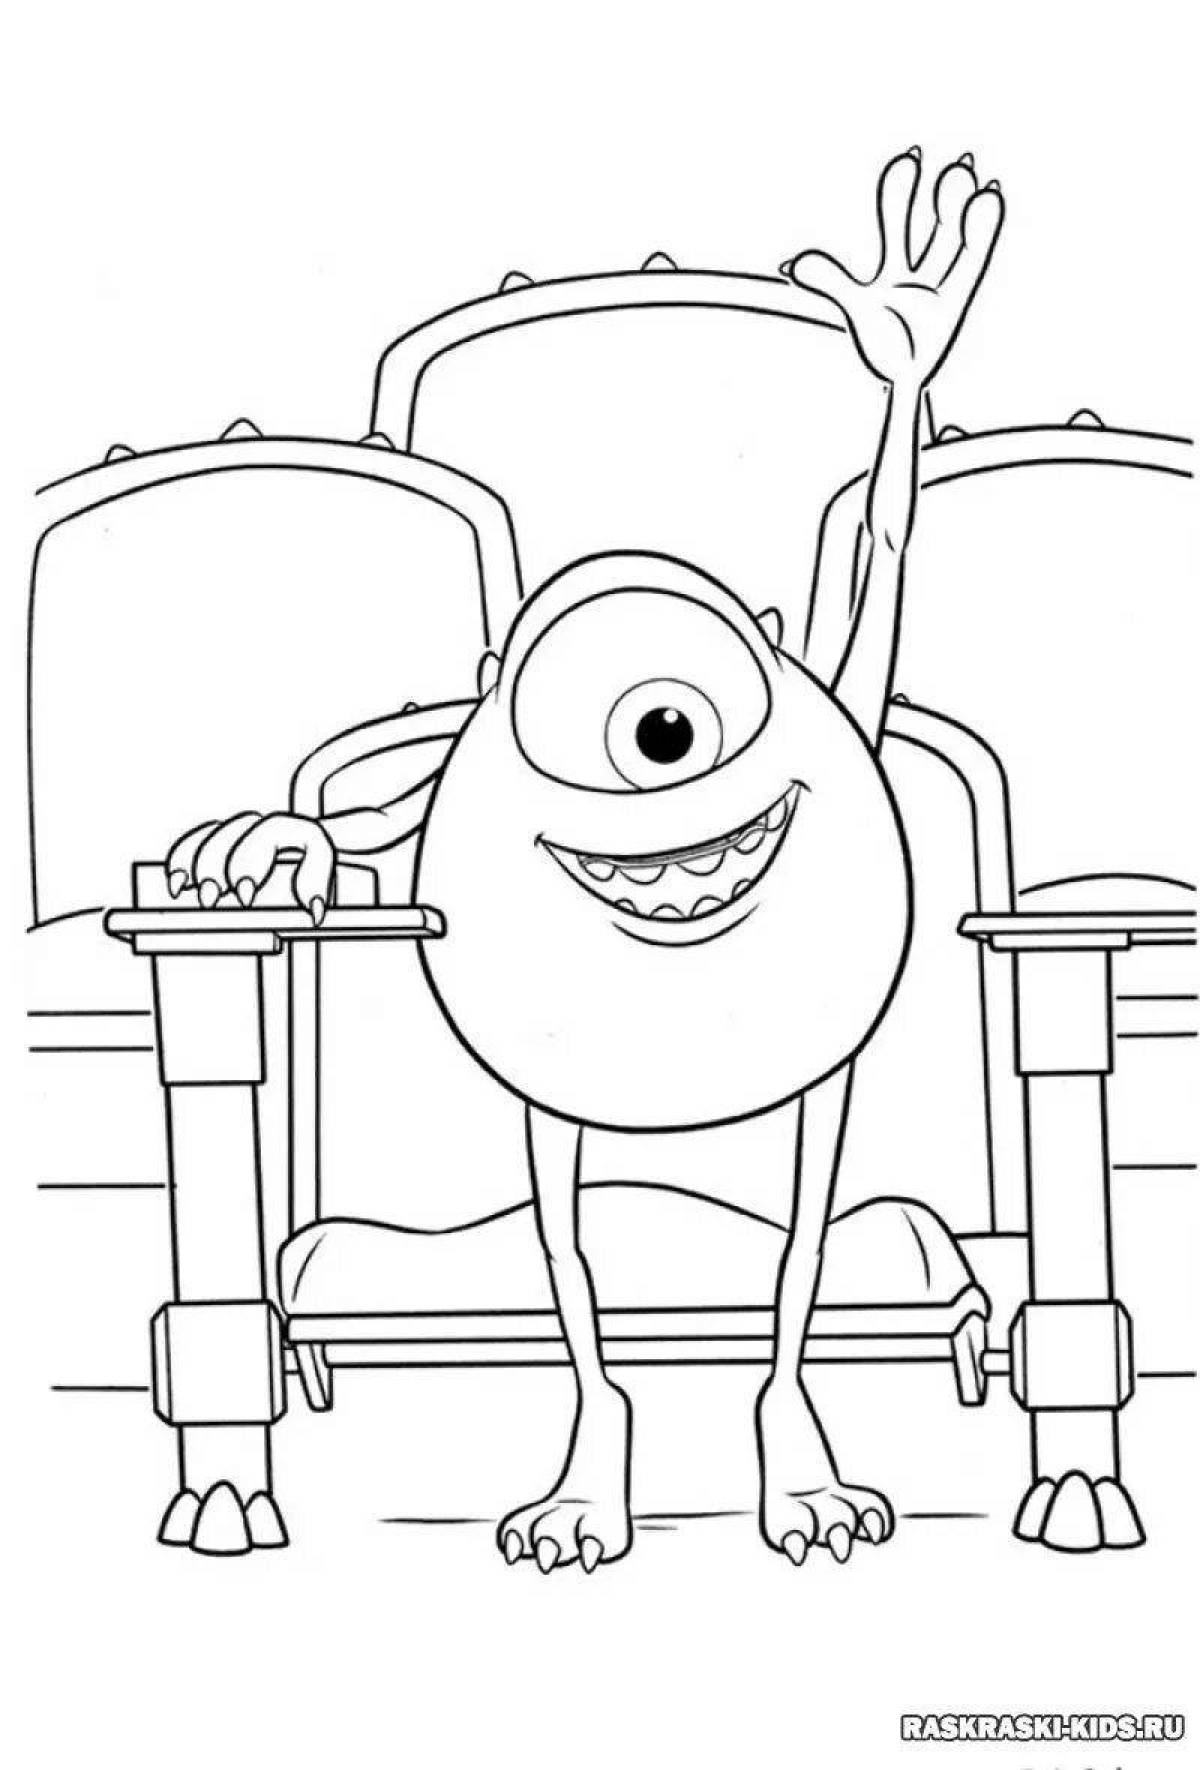 Colorful Monsters University coloring page